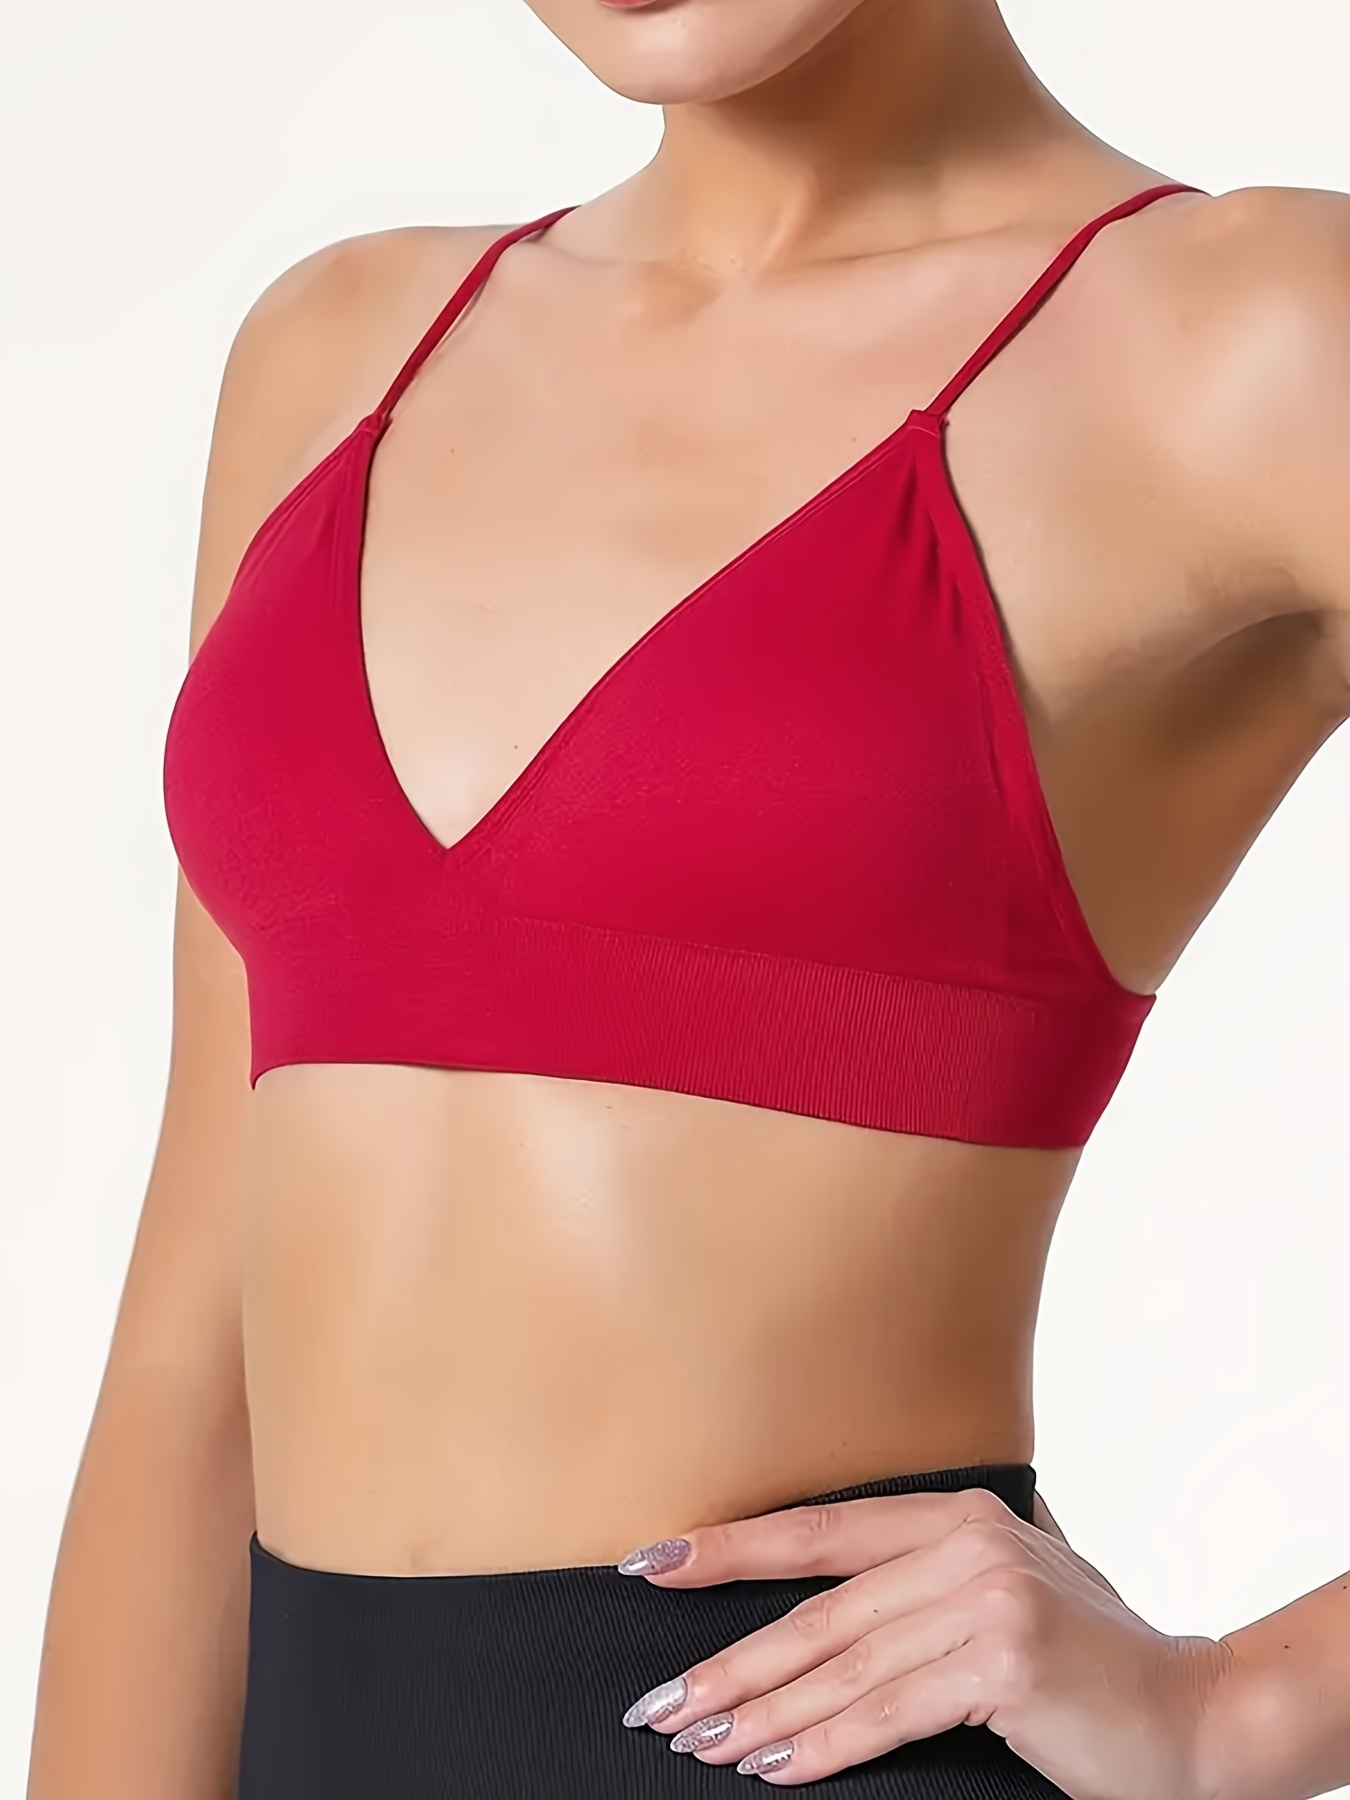 Seamless Bra for Women Female Underwear Lingerie Fitness Intimates (Color :  7, Cup Size : 70A)